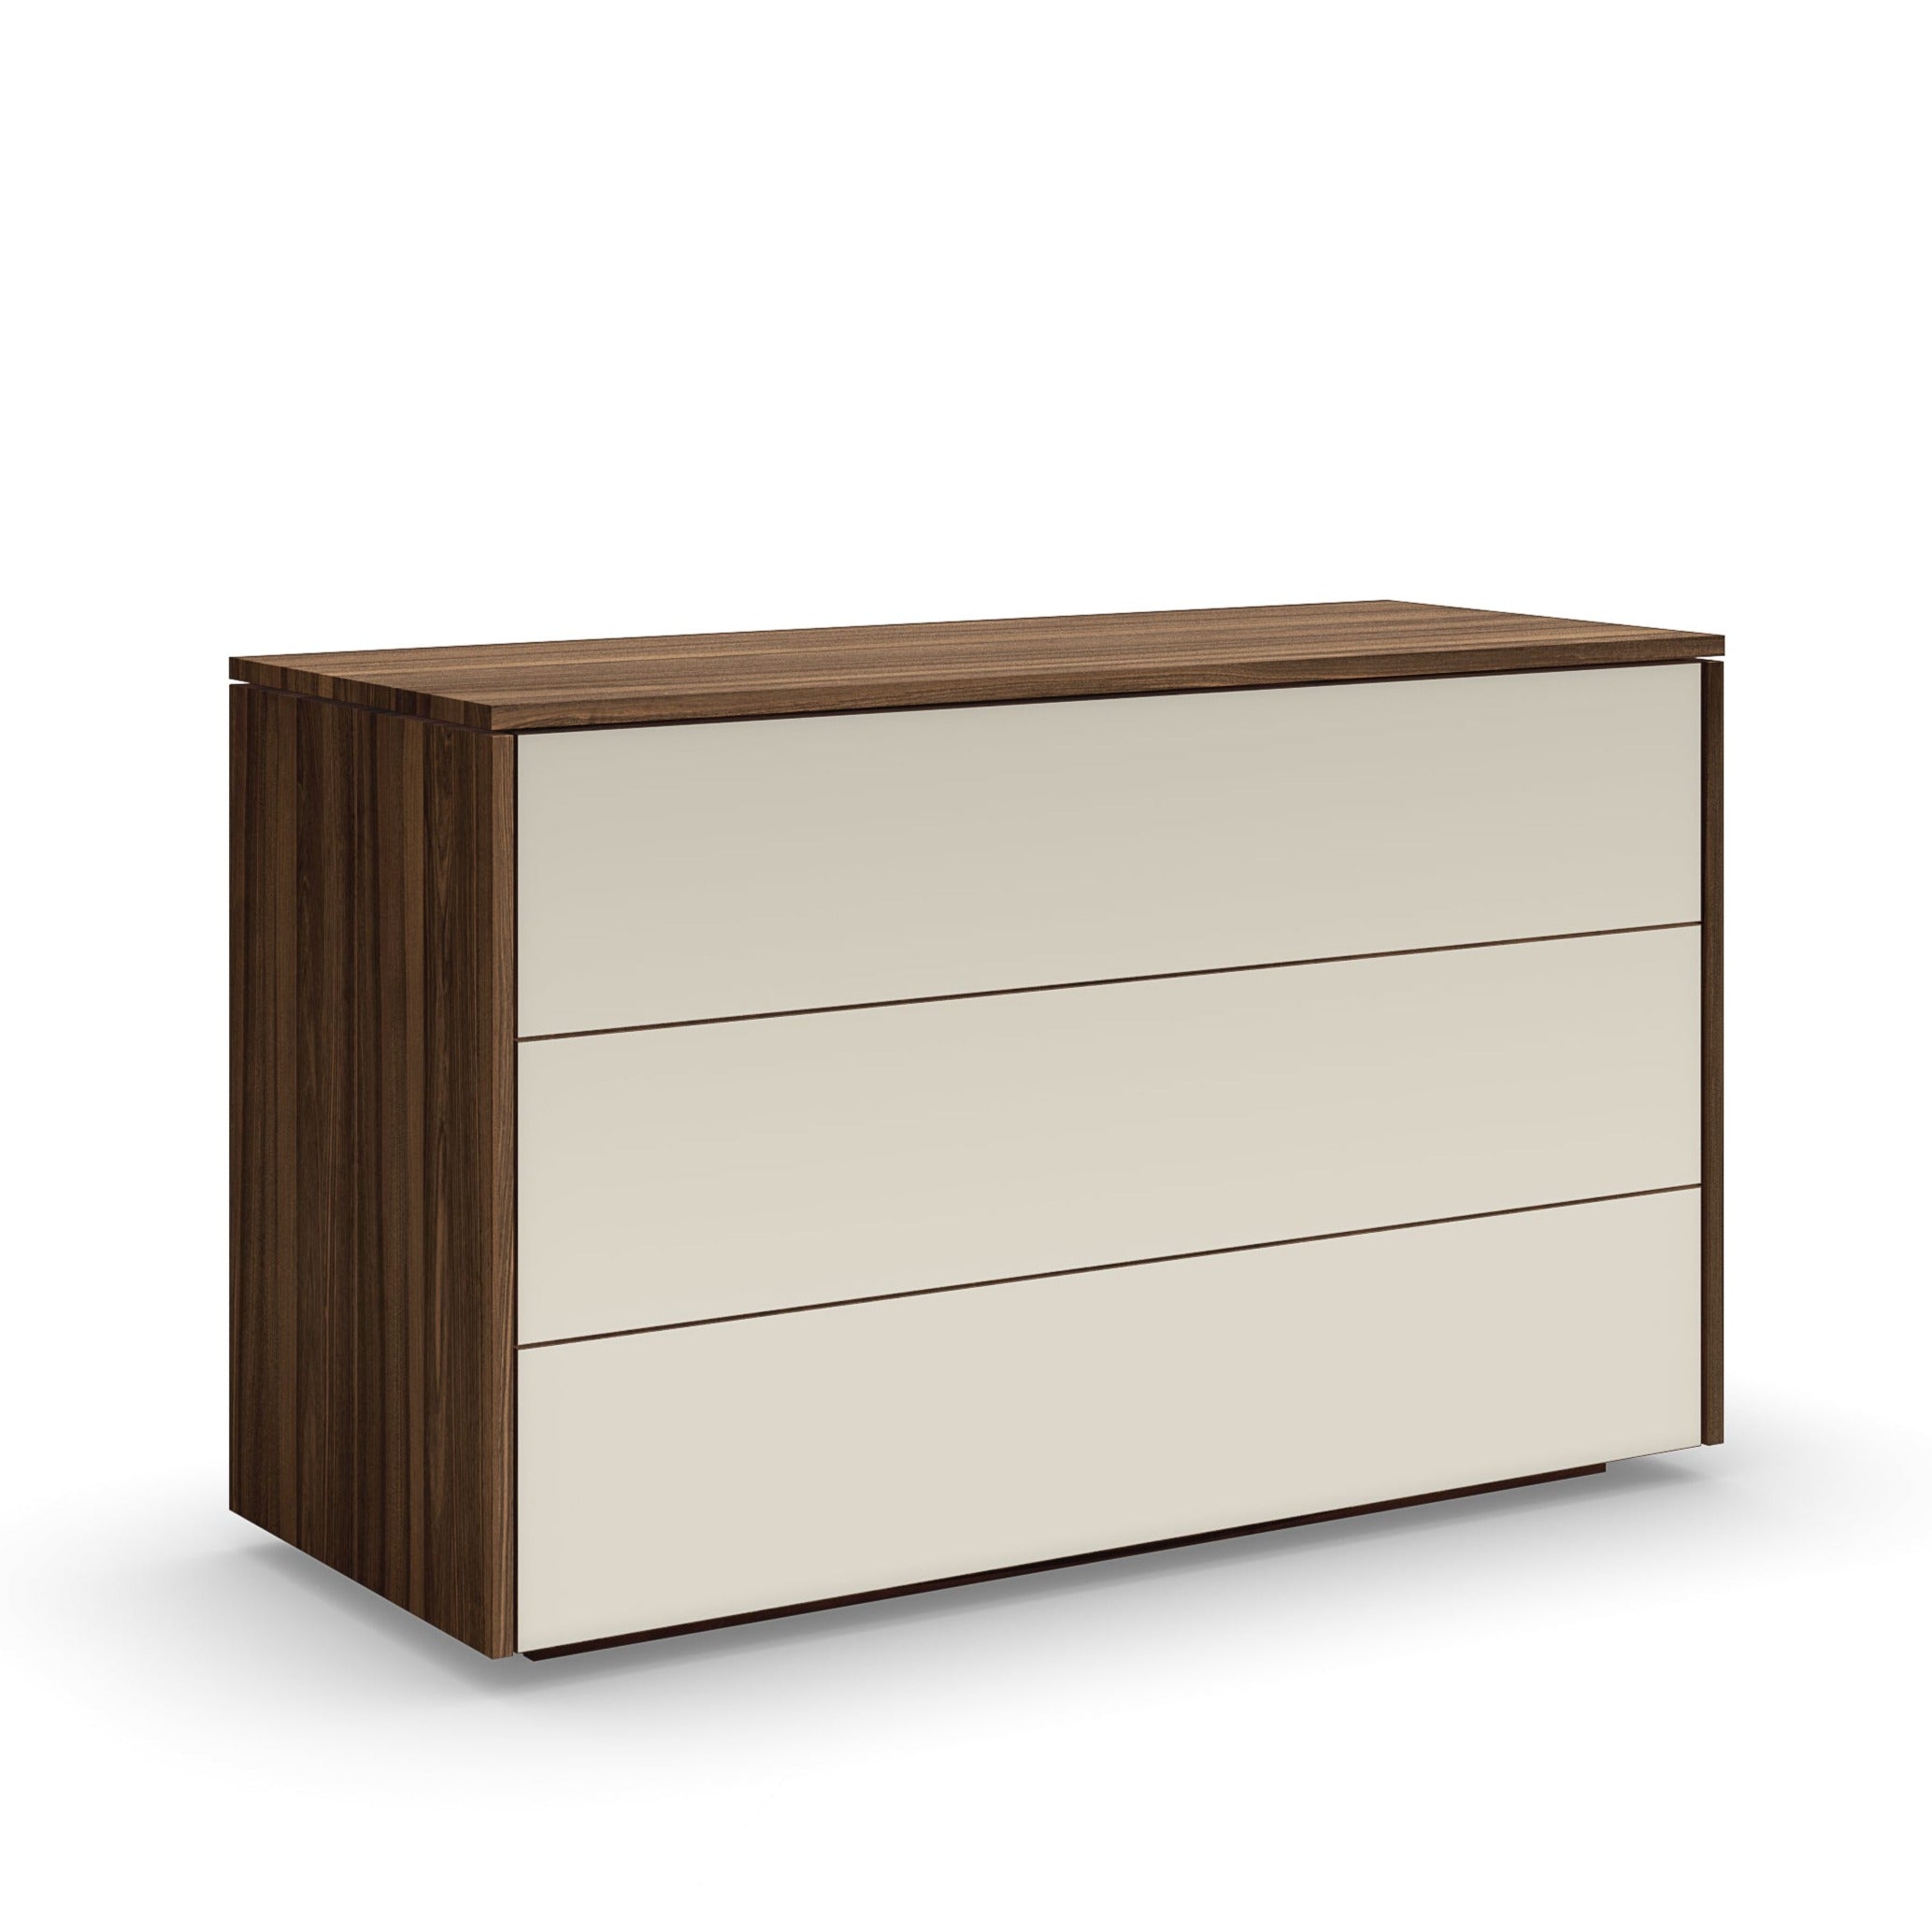 MYA SINGLE DRESSER WITH GLASS DRAWER FRONTS